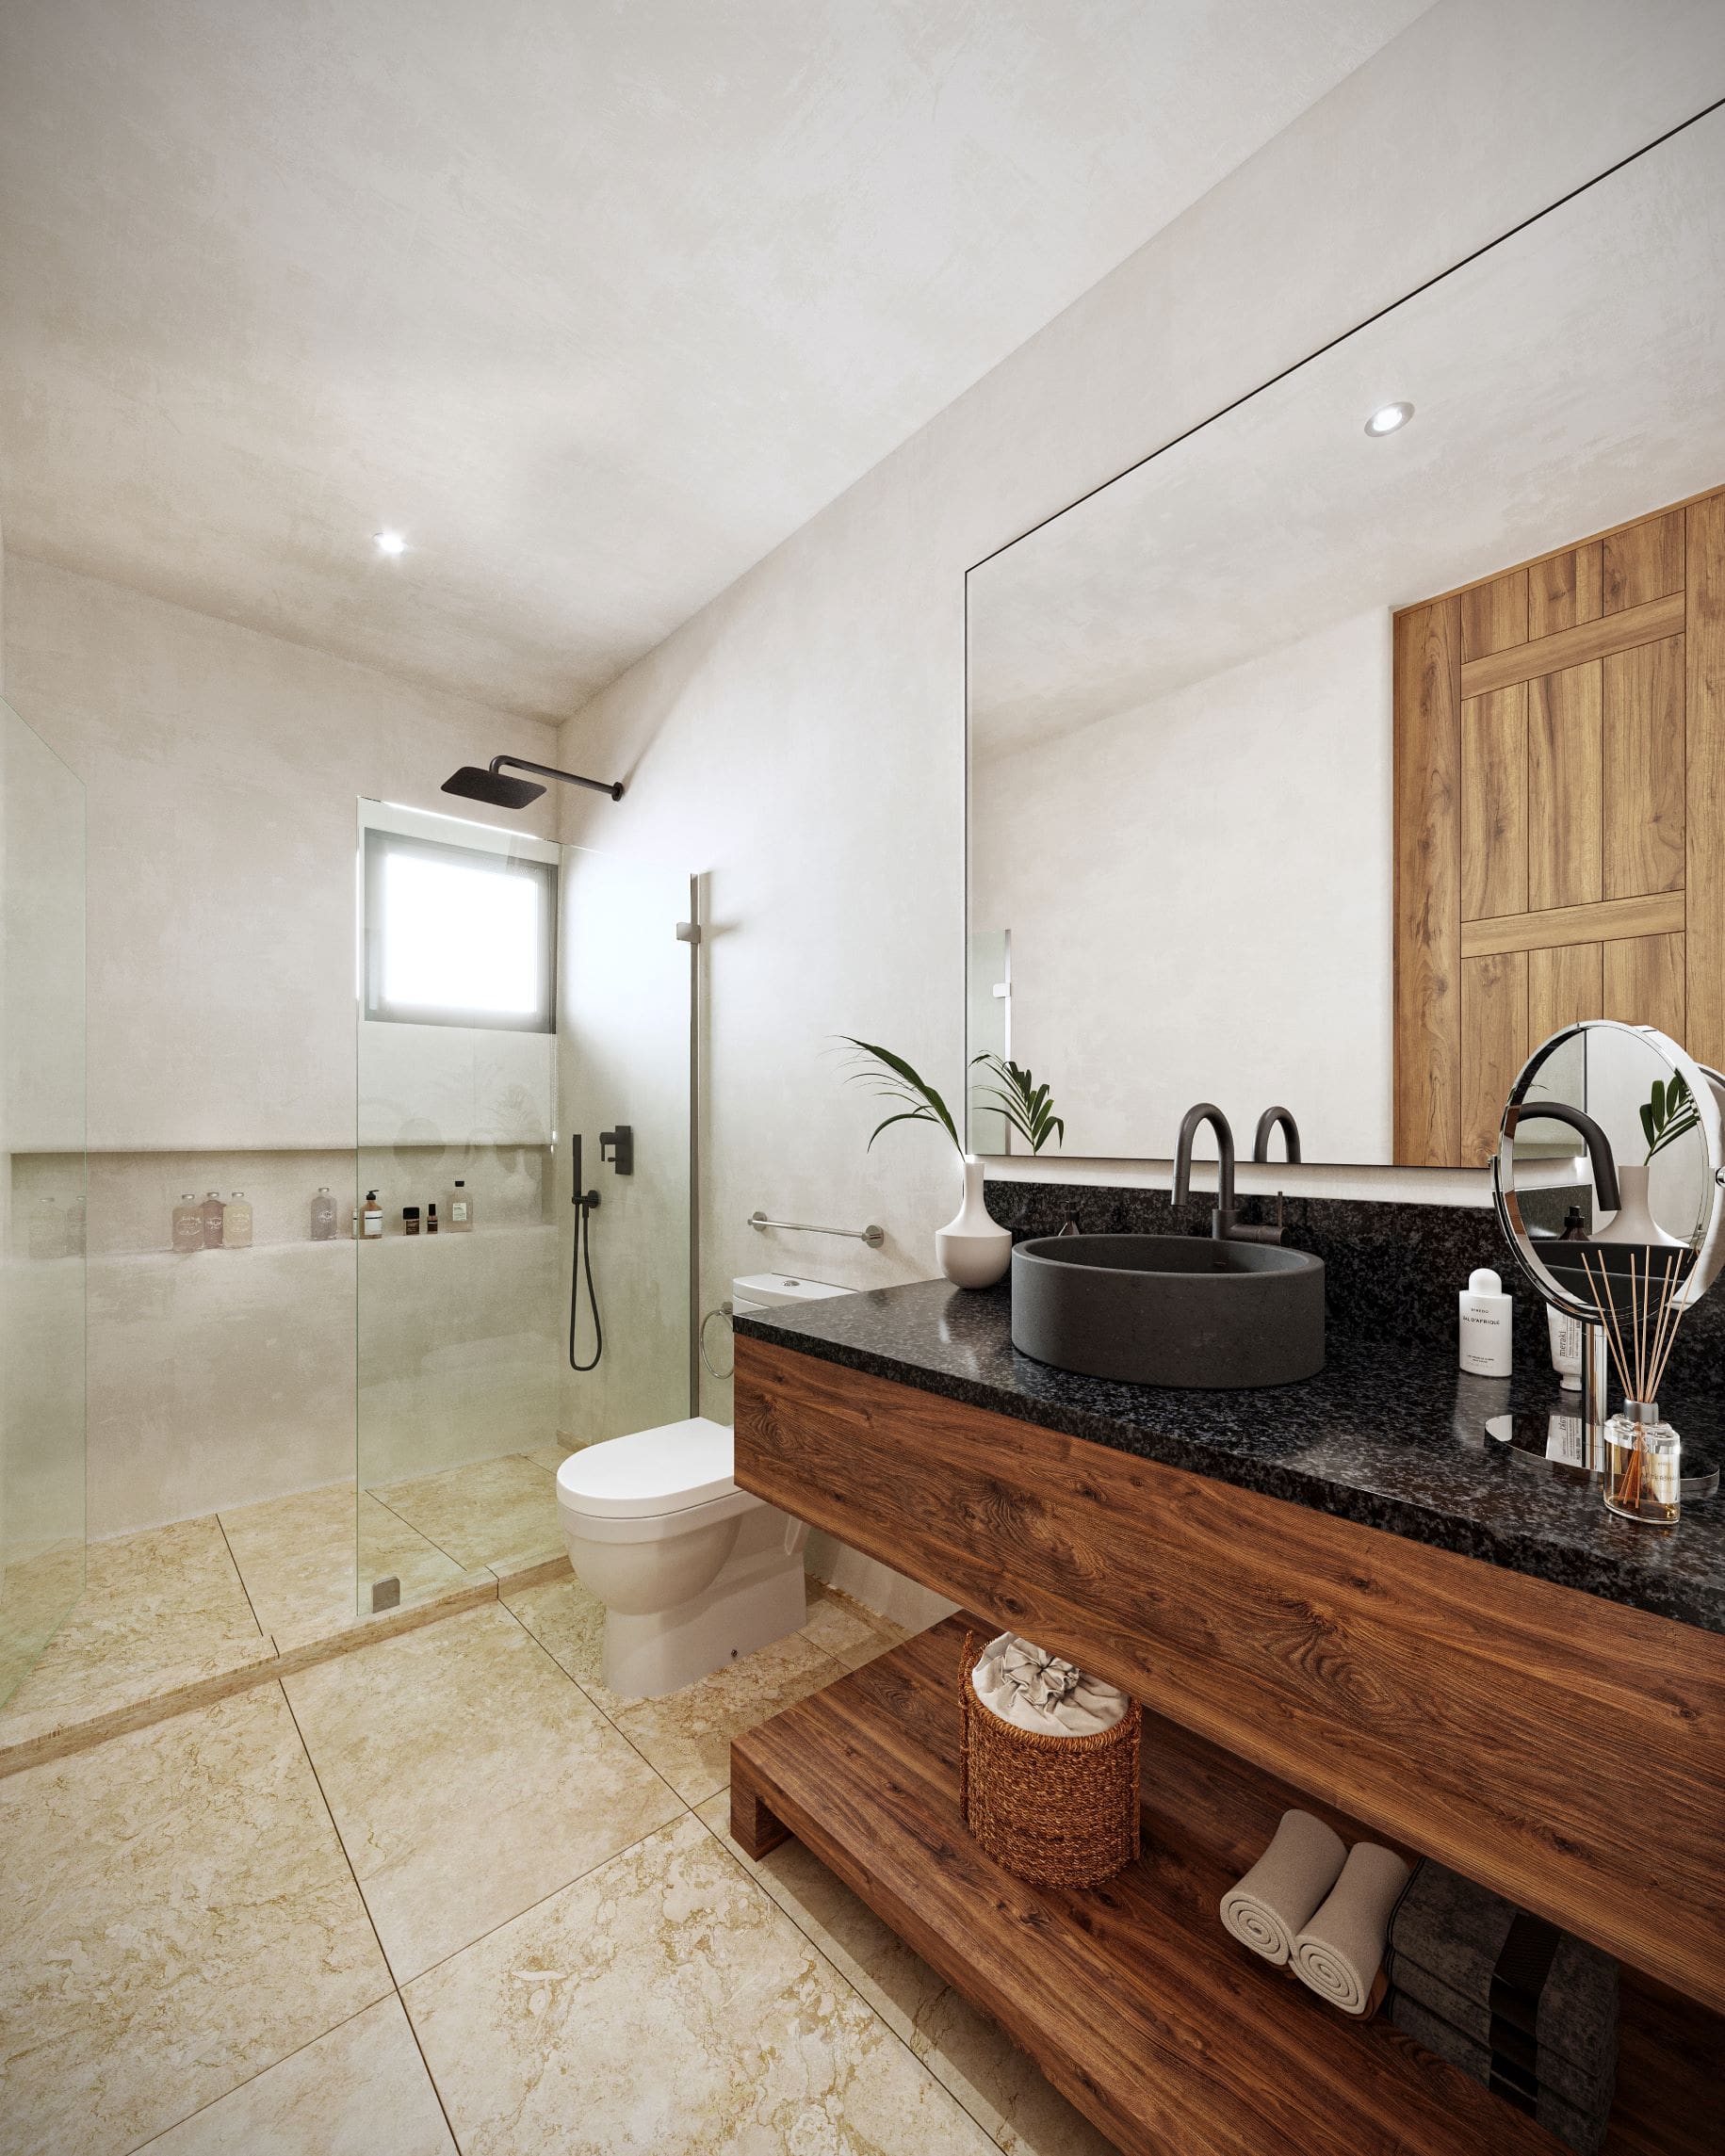 j villas for sale in tulum mexico kaybe bathroom